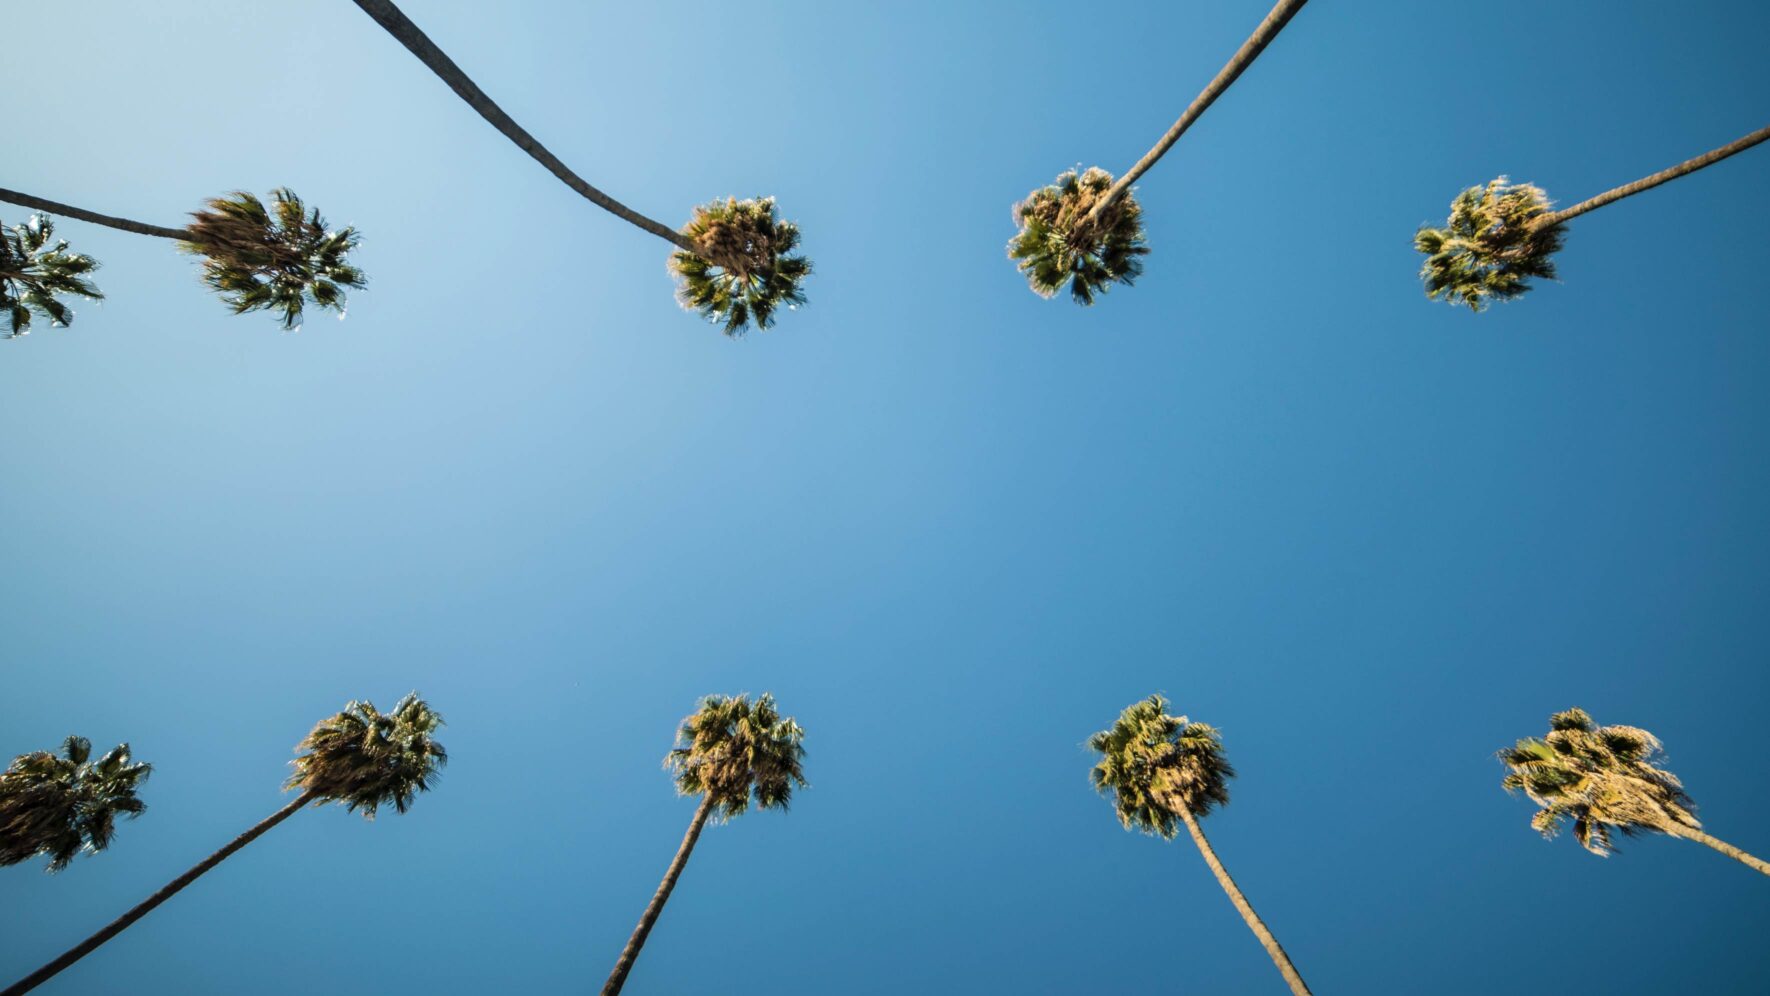 Looking up at two rows of palm trees against a clear blue sky